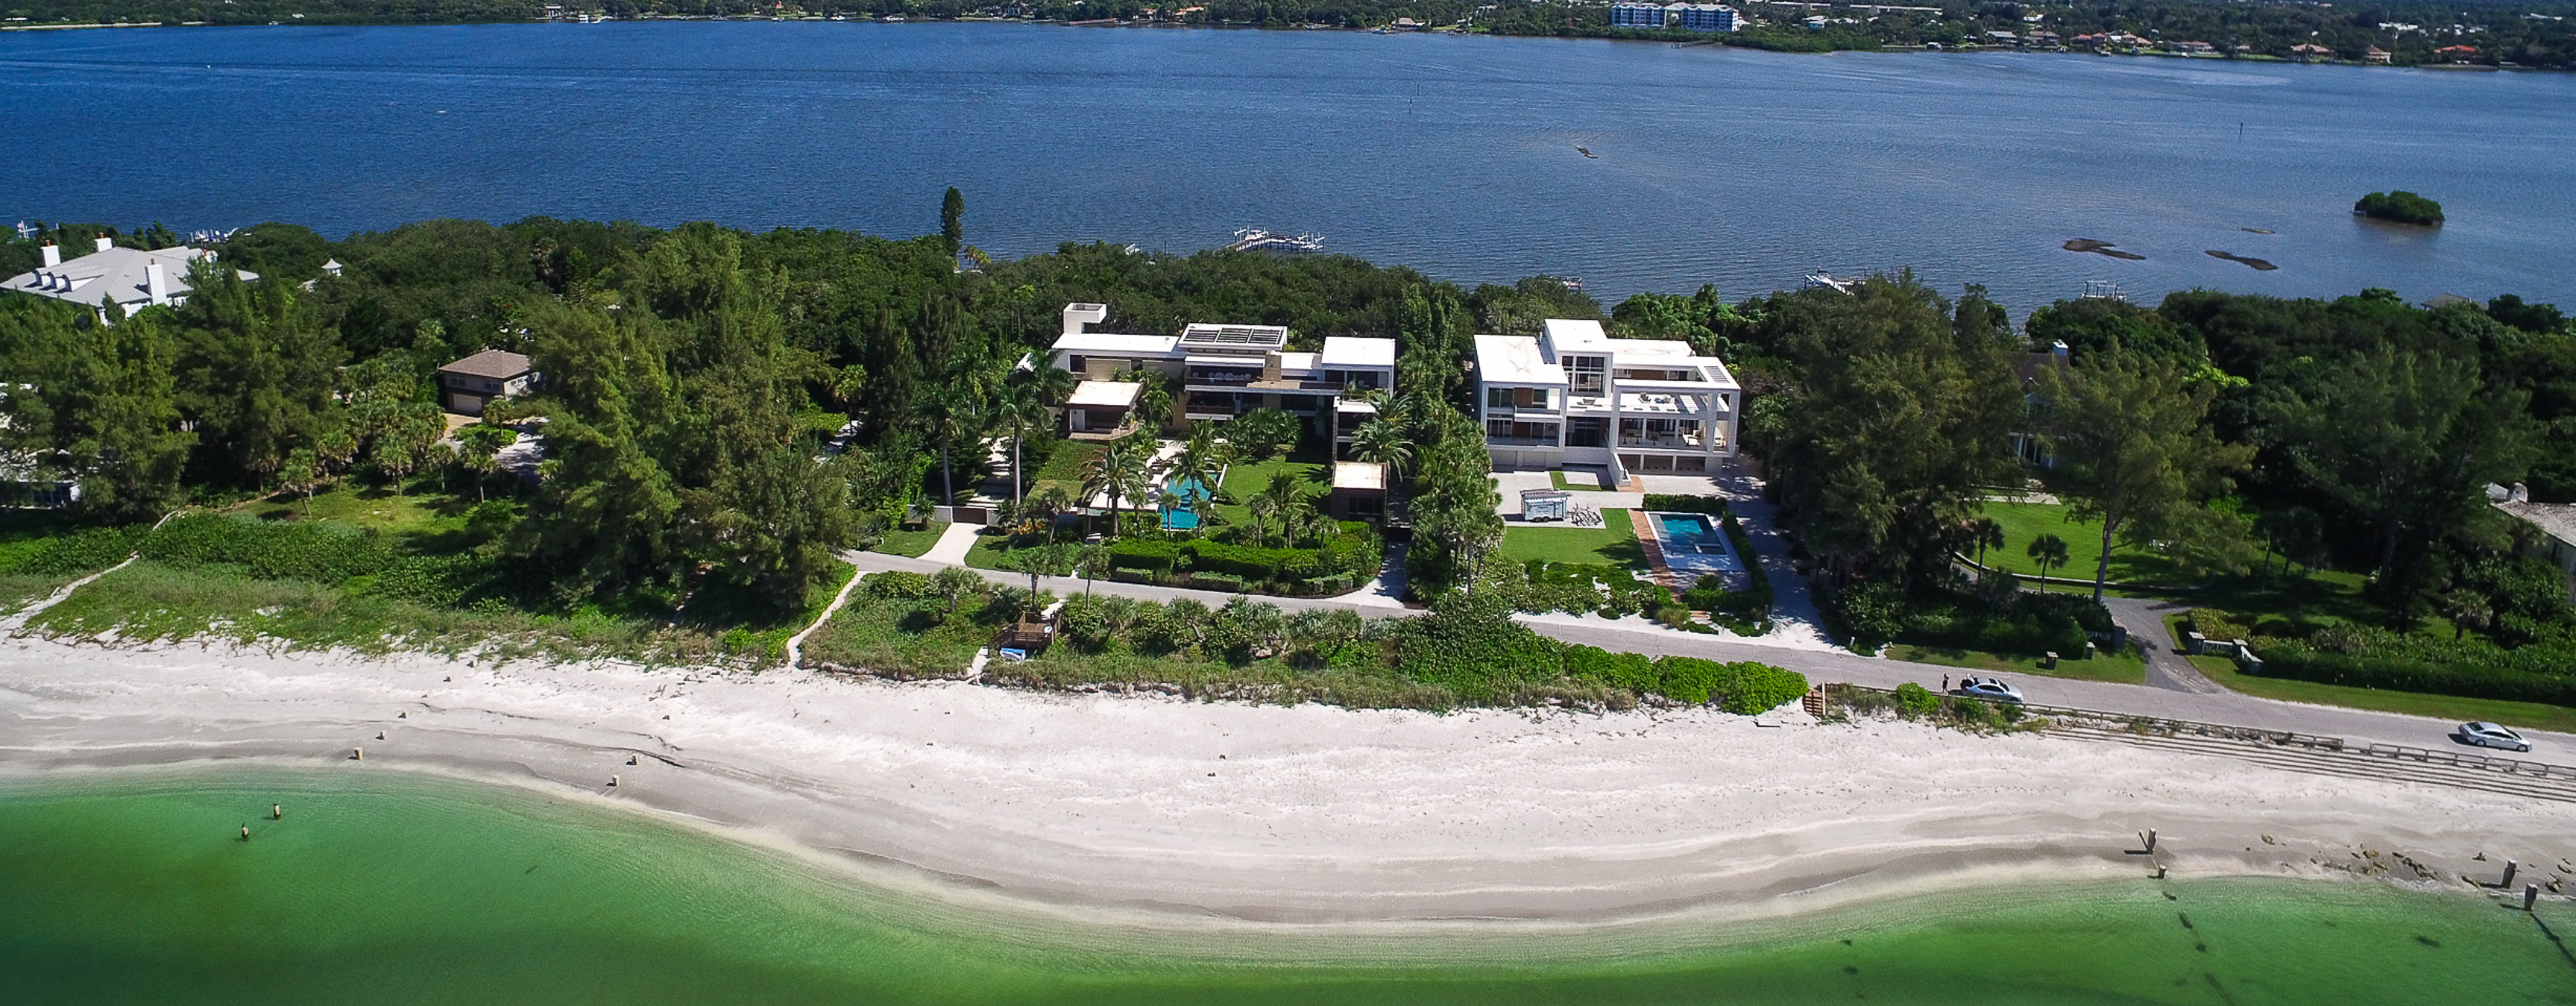 Casey Key Waterfront Homes for Sale